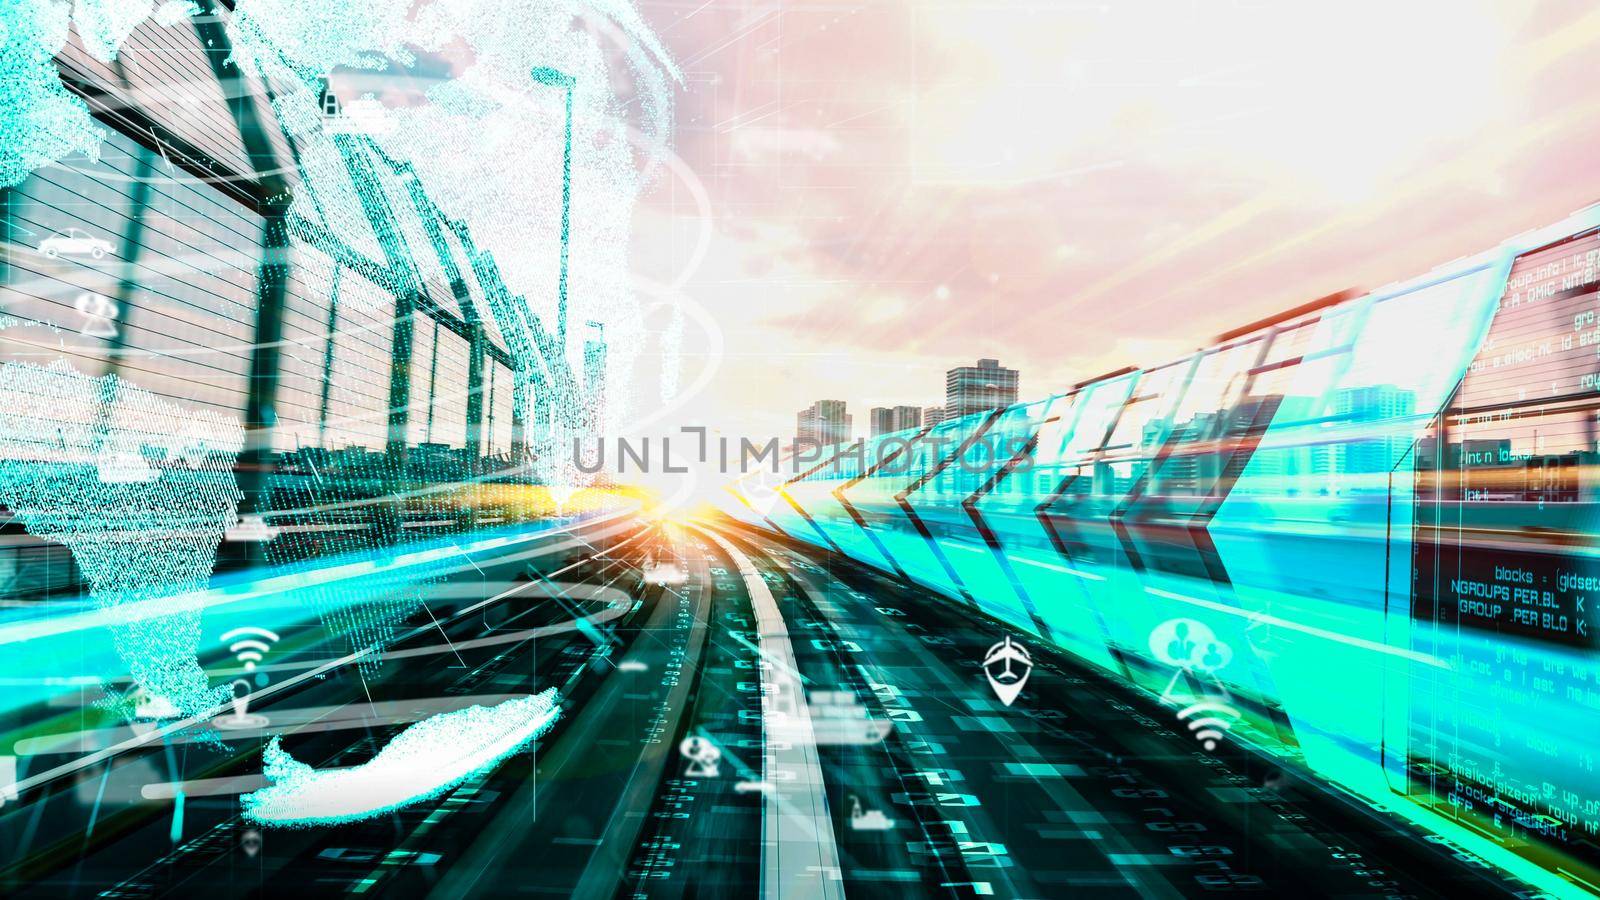 Smart transportation in tacit futuristic city with online traffic control system by biancoblue